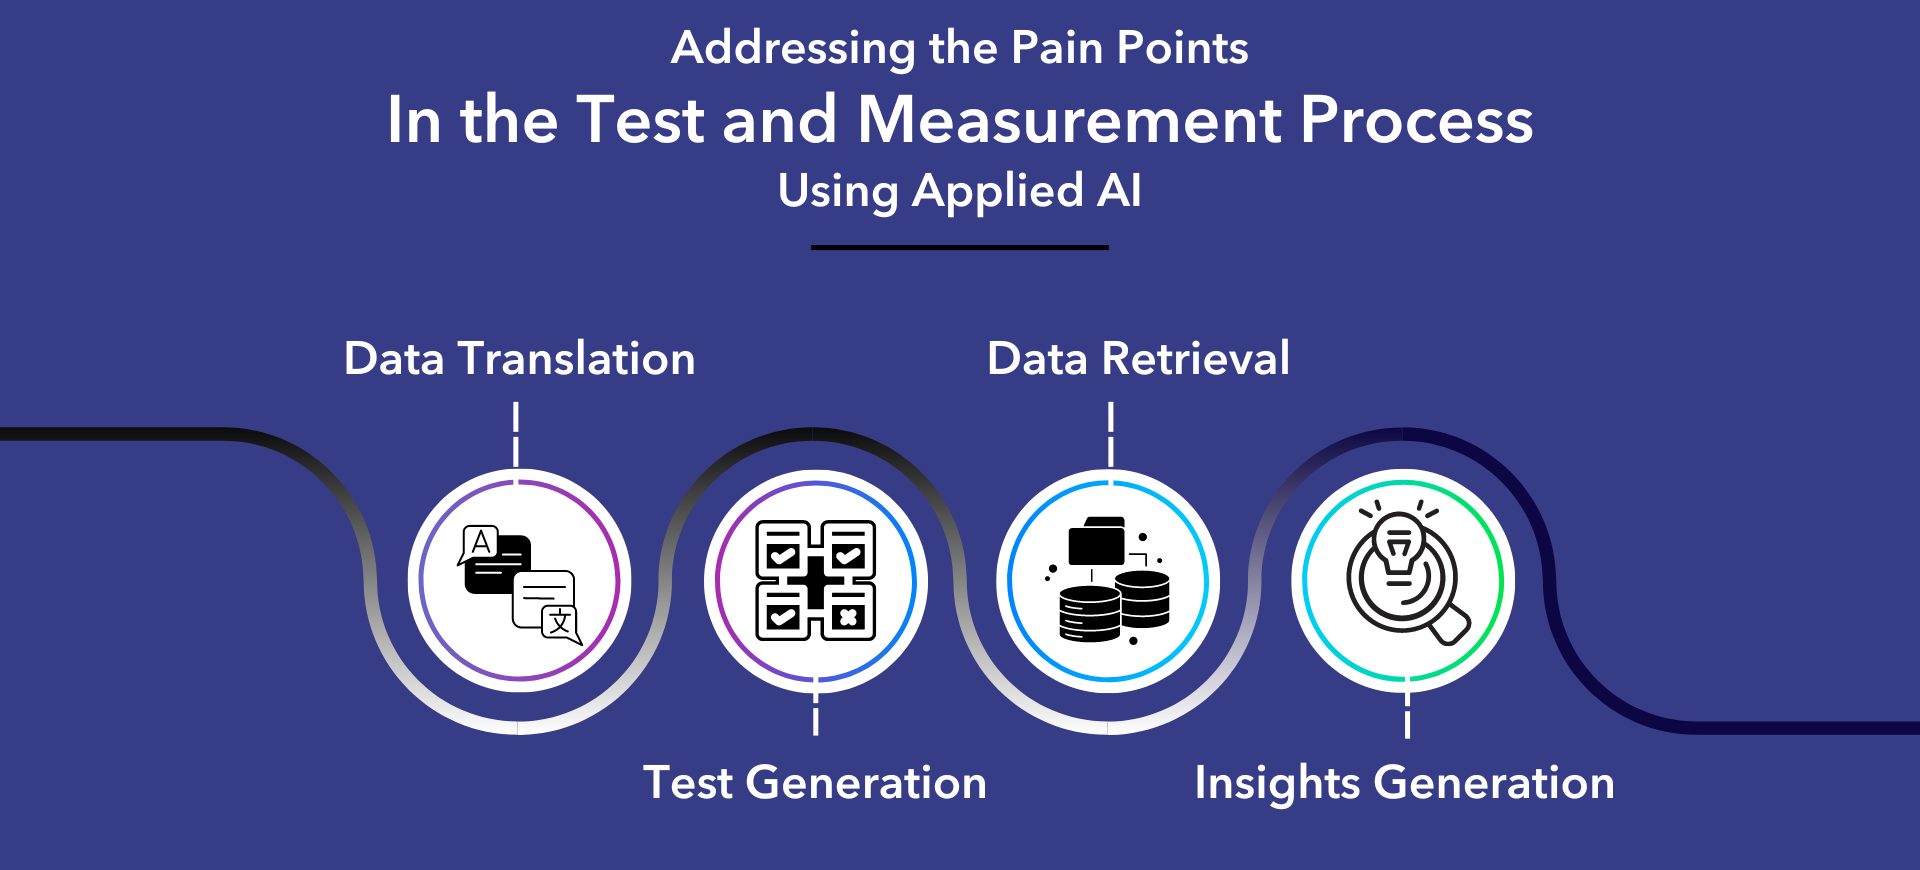 Addressing the Pain Points in Test and Measurement